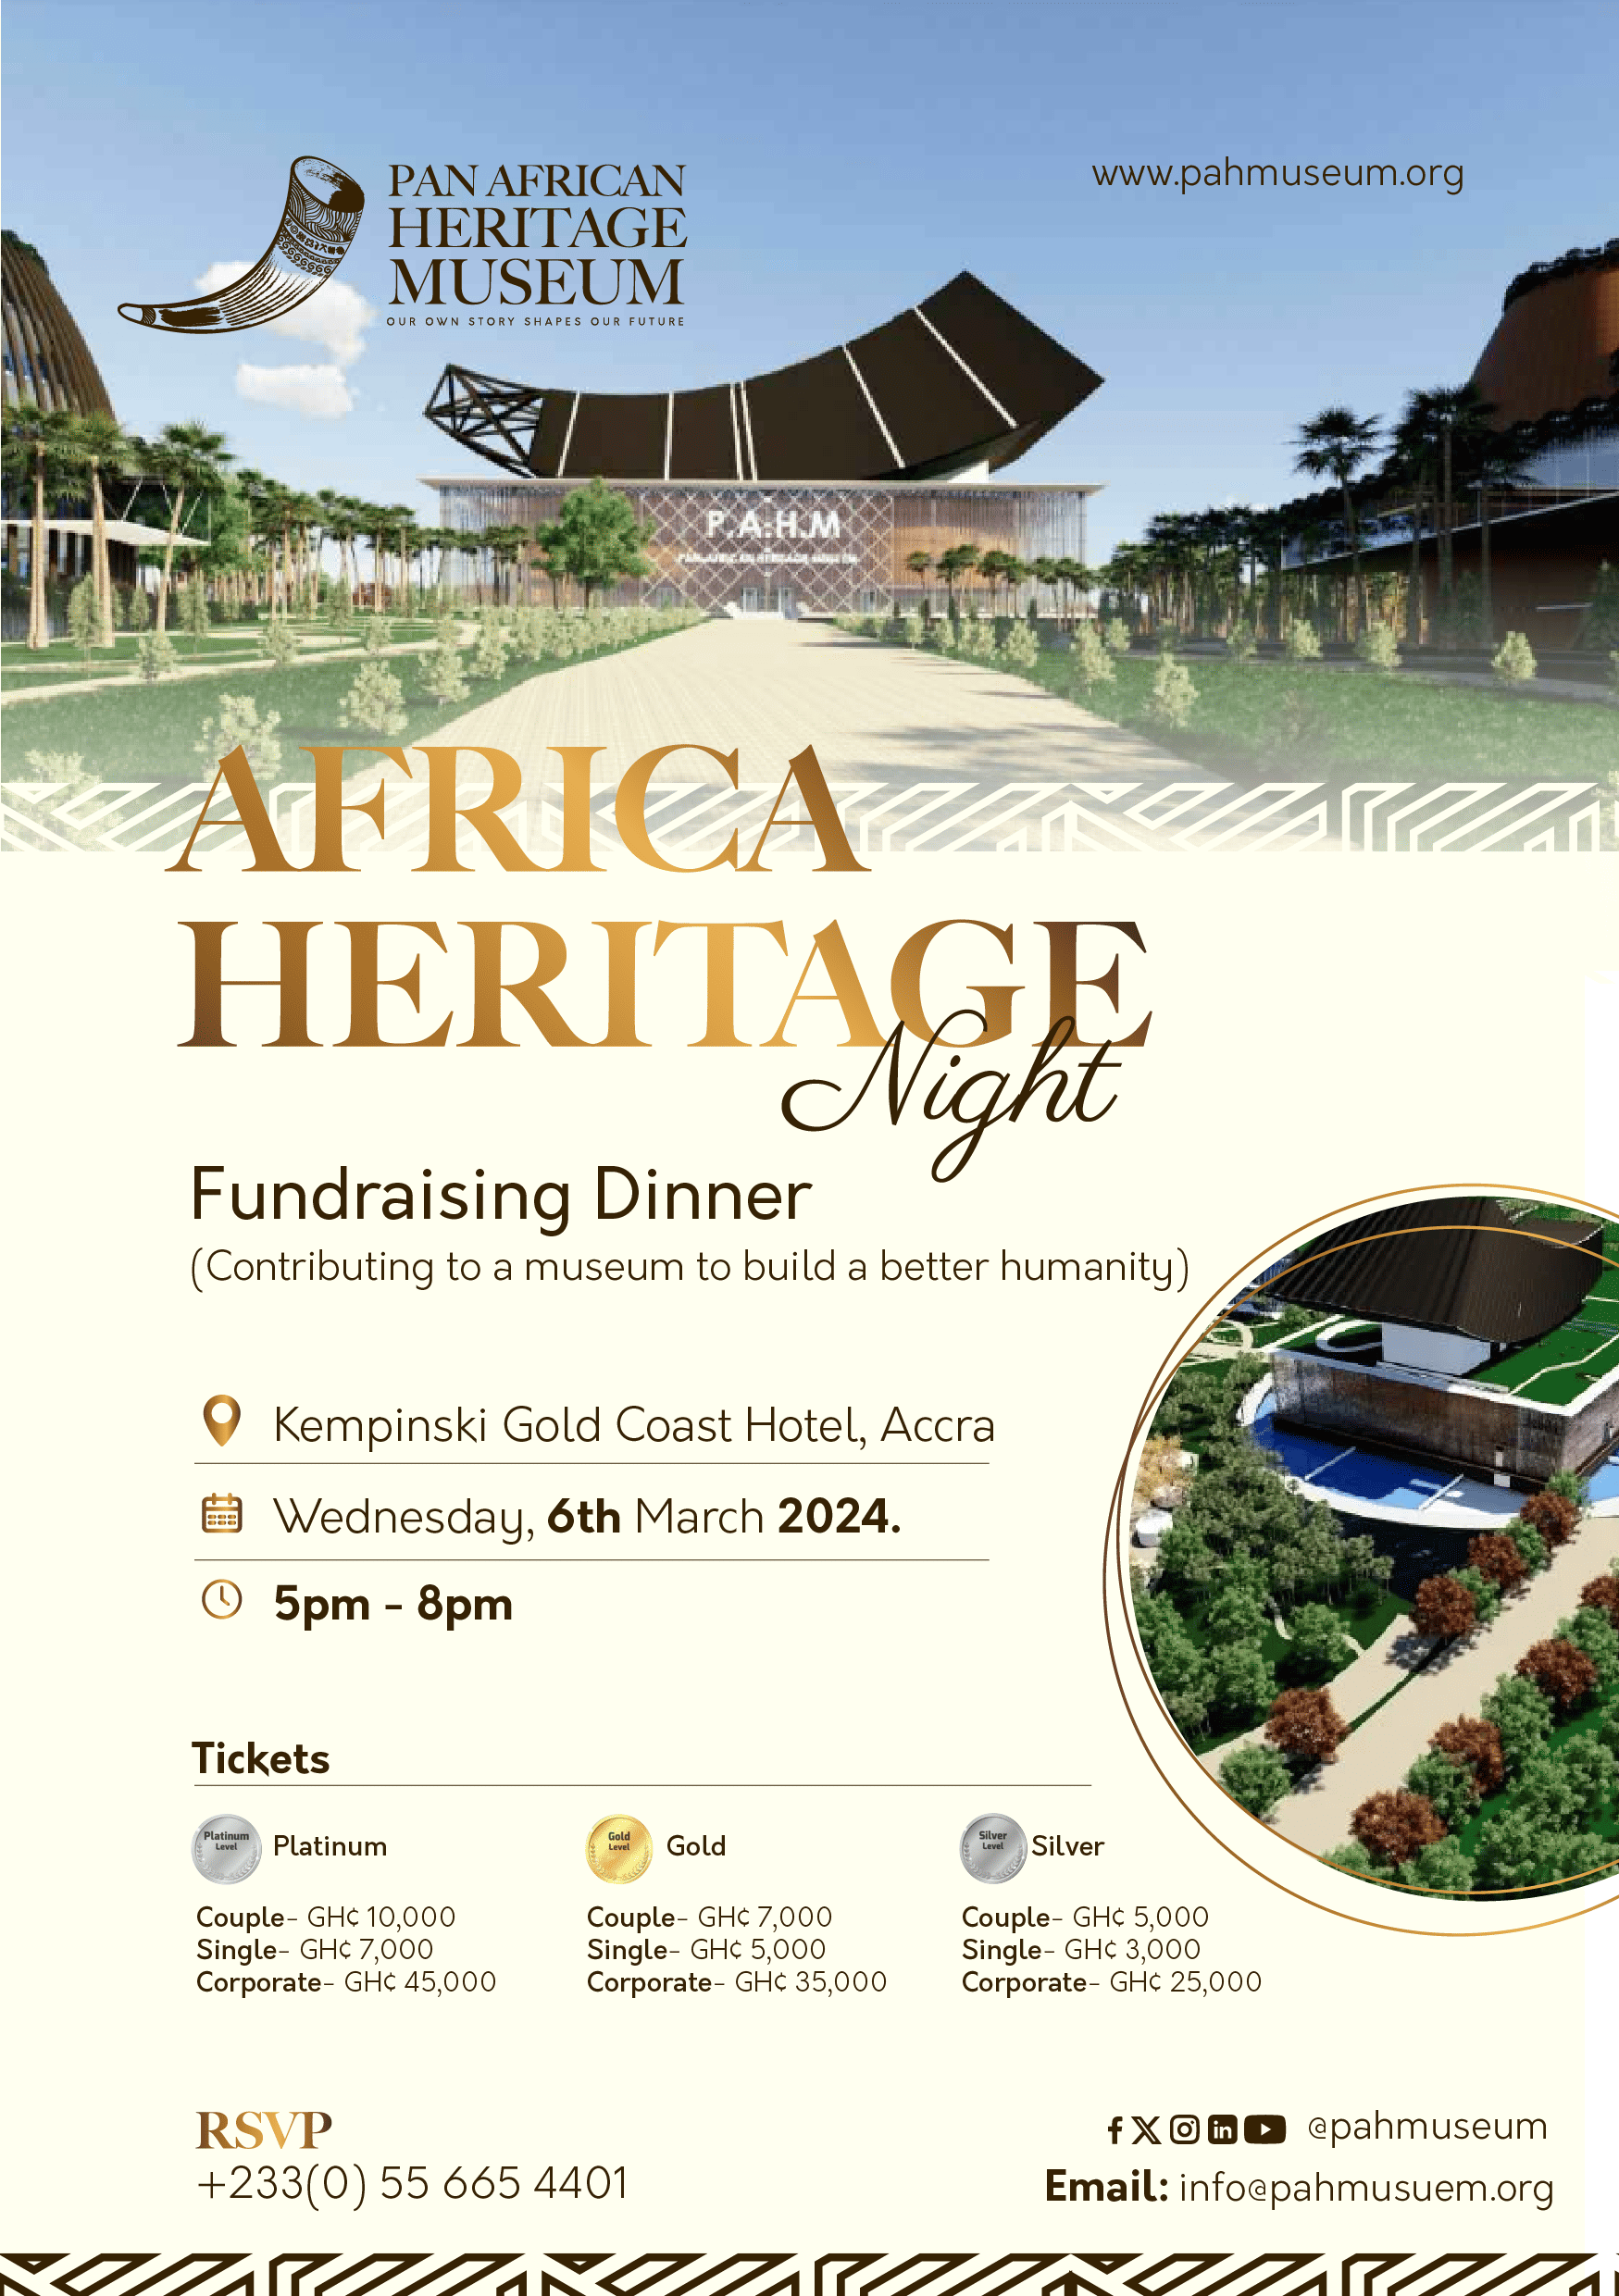 The Executive Council of the Pan African Heritage Museum (PAHM) is hosting a history-making Fundraising Dinner at the imposing Kempinski Gold Coast Hotel on Ghana’s Independence Day, Wednesday 6th March 2024. Themed “the Africa Heritage Night – Making a Contribution towards a Better Humanity”, the event is organized to raise more funds for the construction of the $50m Pan African Heritage Museum on Heritage Hills, Pomadze, near Winneba Roundabout. The Night will feature South Africa’s Princess of Africa Yvonne Chaka Chaka and Ghana’s Rap Doctor Okyeame Kwame, accompanied by the Ghana National Dance Theatre. The Pan African Heritage Museum, conceived as the first of its kind in the world, seeks to exhibit the history, arts, culture, achievements and ideals of the pan African world from the ancient to the present. The Dinner, to be held under the patronage of the eminent Council of Elders of the Museum, is expected to attract corporate Africa, Patrons of the arts, Embassies of the pan African world, and individuals. The Museum designer, James Nnedu-George of Nigeria, Dr. Babacar MBow of Senegal and Sandra Appiah, CEO of Face2Face Africa will be present. Partners: The event is expected to attract Corporate Africa, Patrons of the Arts, Embassies of the Pan African World, and individuals like; Sandra Appiah, CEO of Face2Face Africa, Dr. Babacar MBow of Senegal, and James Nnedu-George of Nigeria – The Museum Designer. ⁠Performers : Okyeame Kwame, Yvonne Chaka Chaka, Ghana National Dance Company. Duration: 3 hours